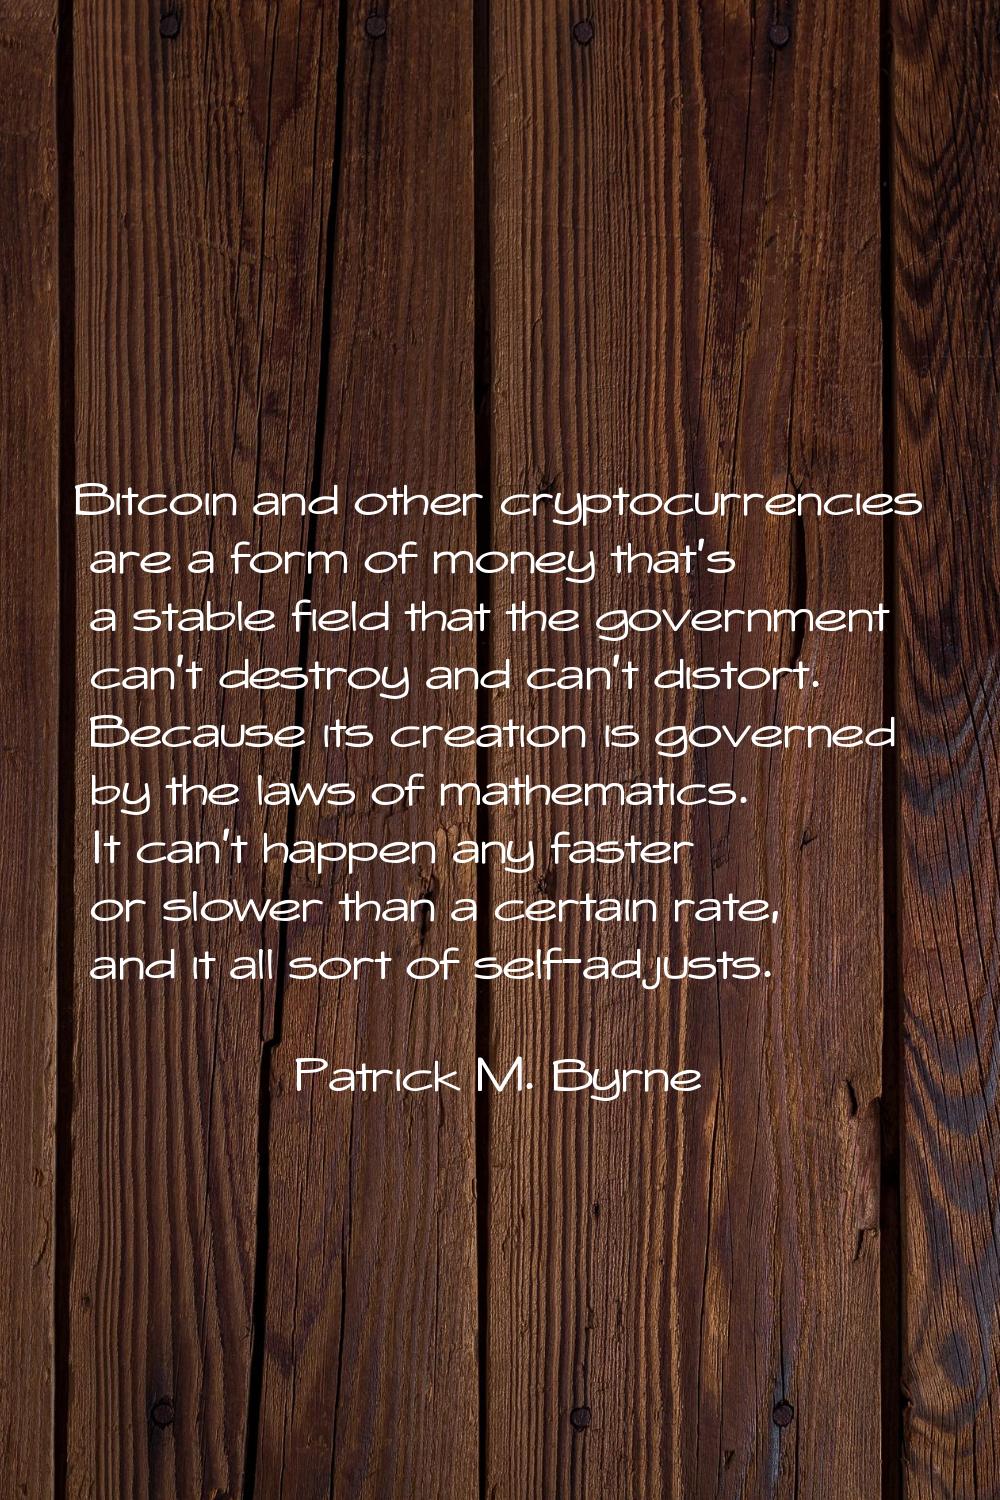 Bitcoin and other cryptocurrencies are a form of money that's a stable field that the government ca